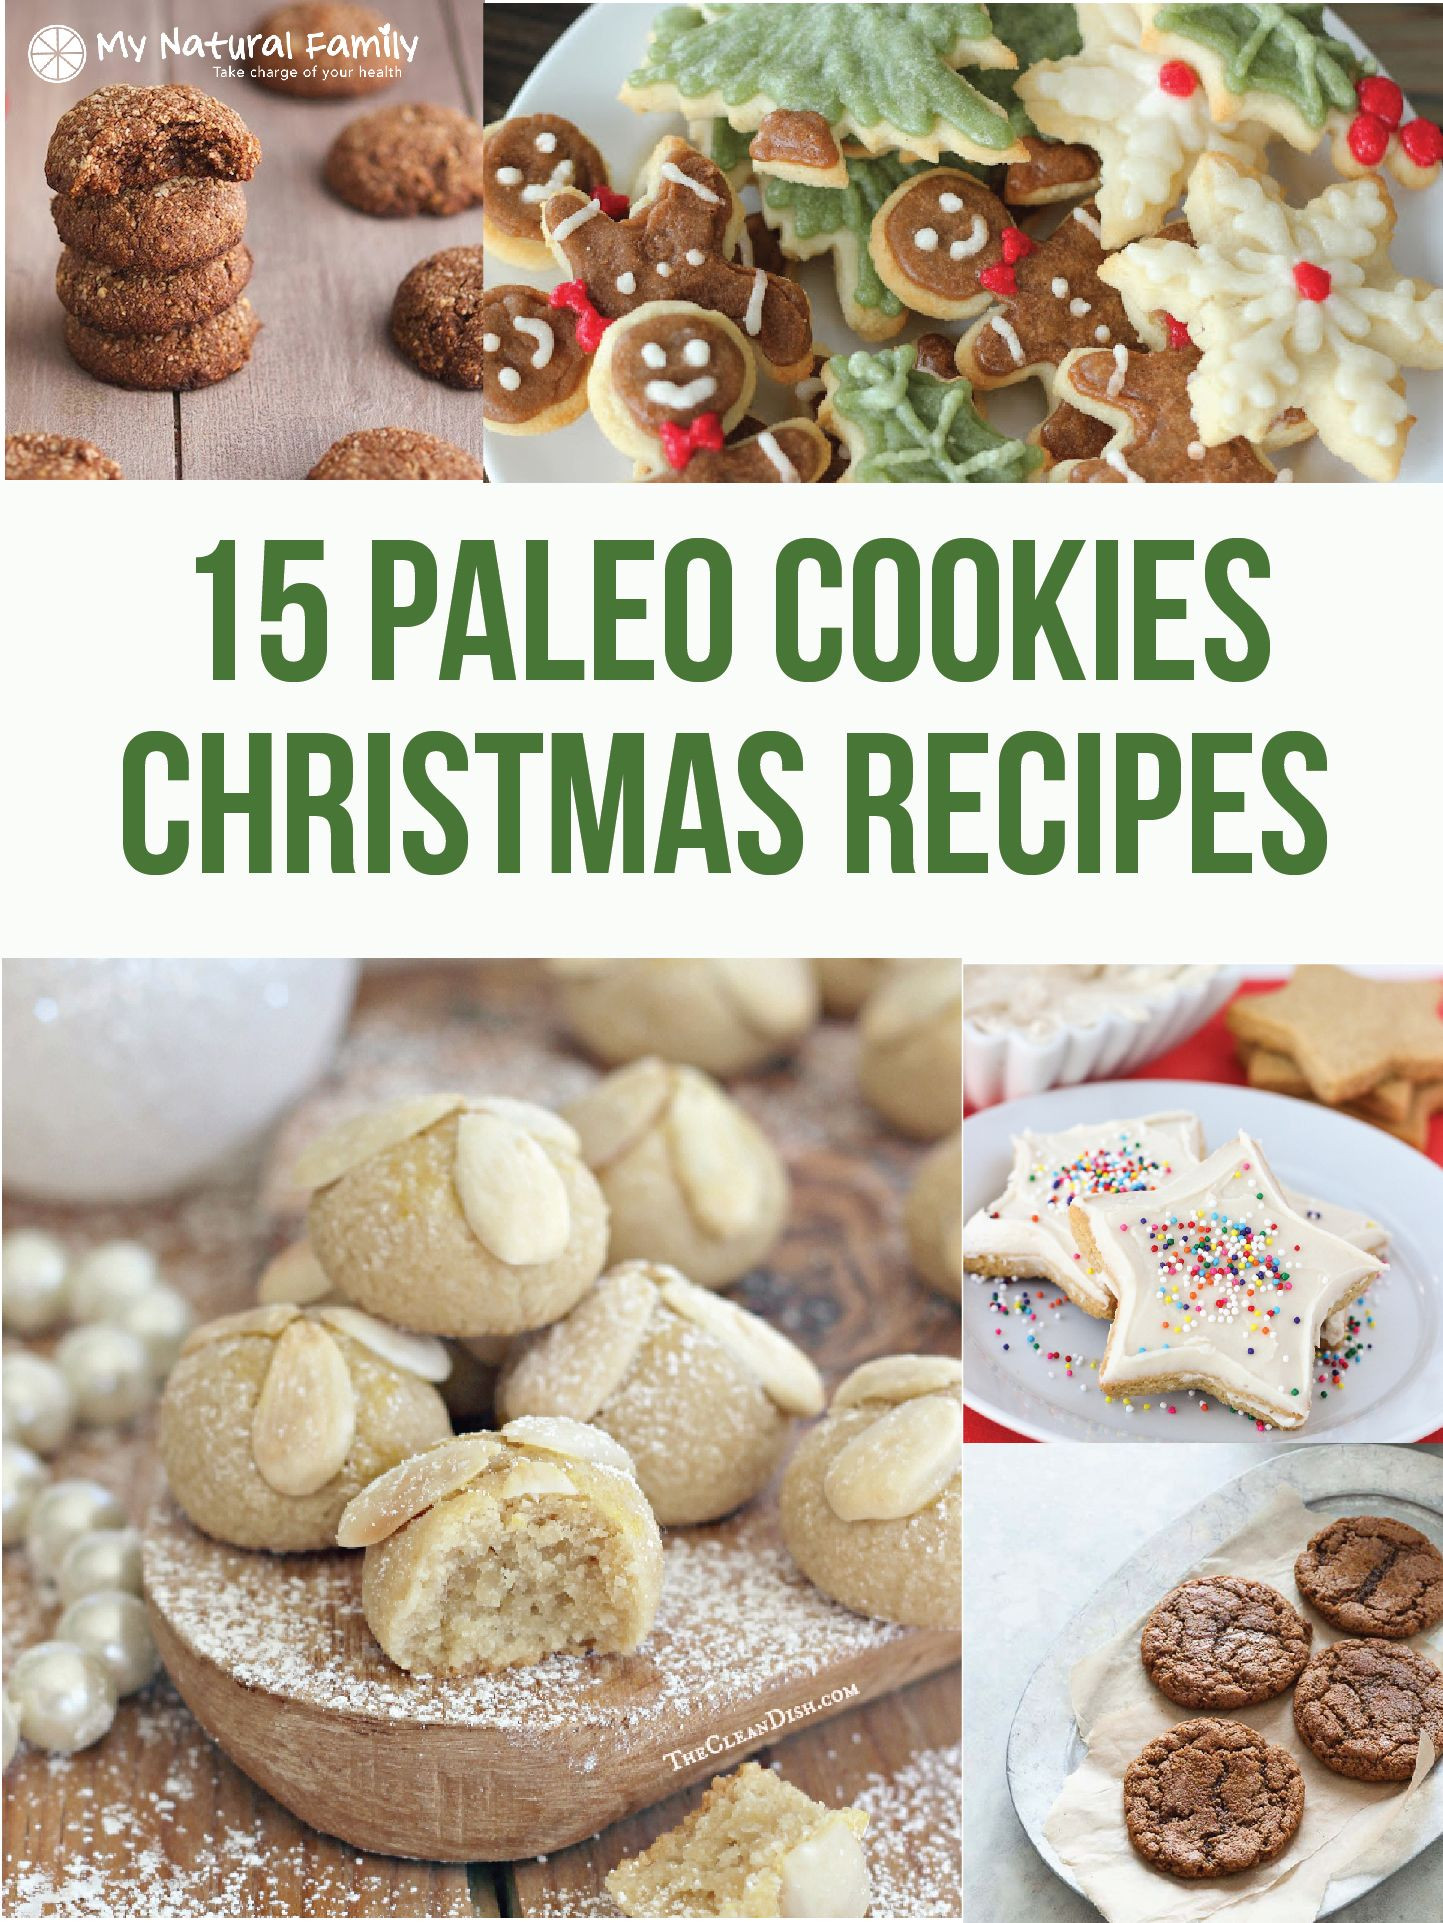 Paleo Christmas Cookies
 9 of the Best Ever Paleo Christmas Recipes